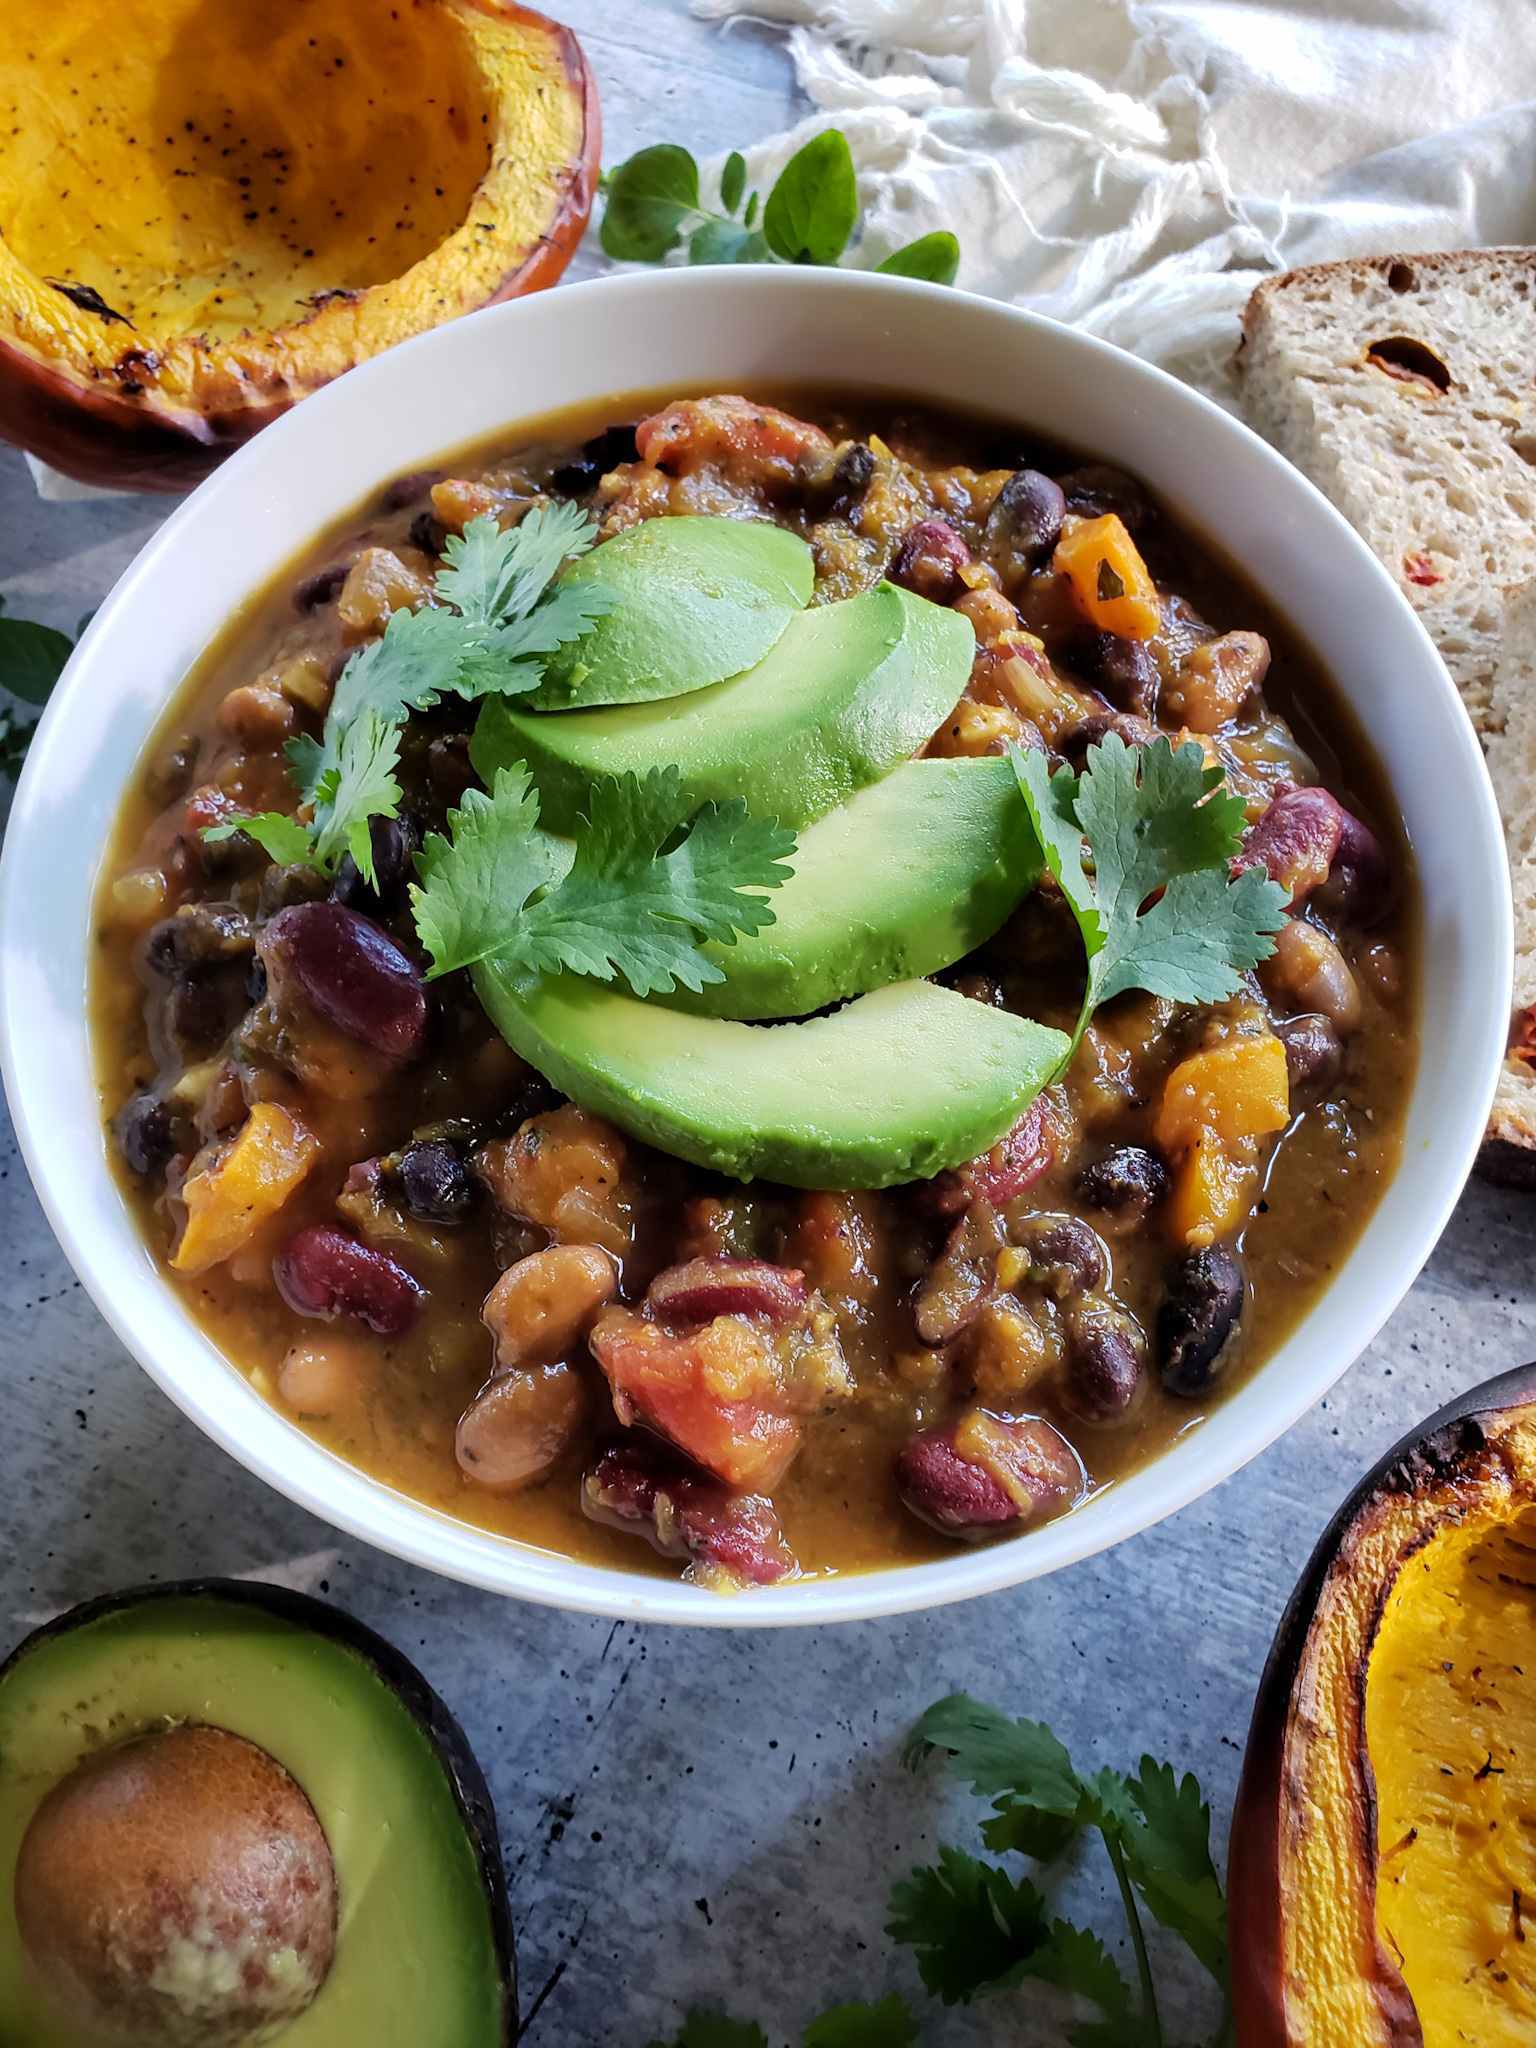 The finished roasted pumpkin chili is shown inside a white ceramic bowl. The beans, tomato, and pumpkin are visible amongst the dark brownish red of the chili base. The chili has been garnished with avocado slices and a few leaves of cilantro. There is half of a roasted pumpkin above the bowl, while a piece of sourdough bread is slightly visible to the right. Another roasted pumpkin half is partially visible to the lower right of the bowl and half an avocado with the pit remaining is visible to the lower left. 